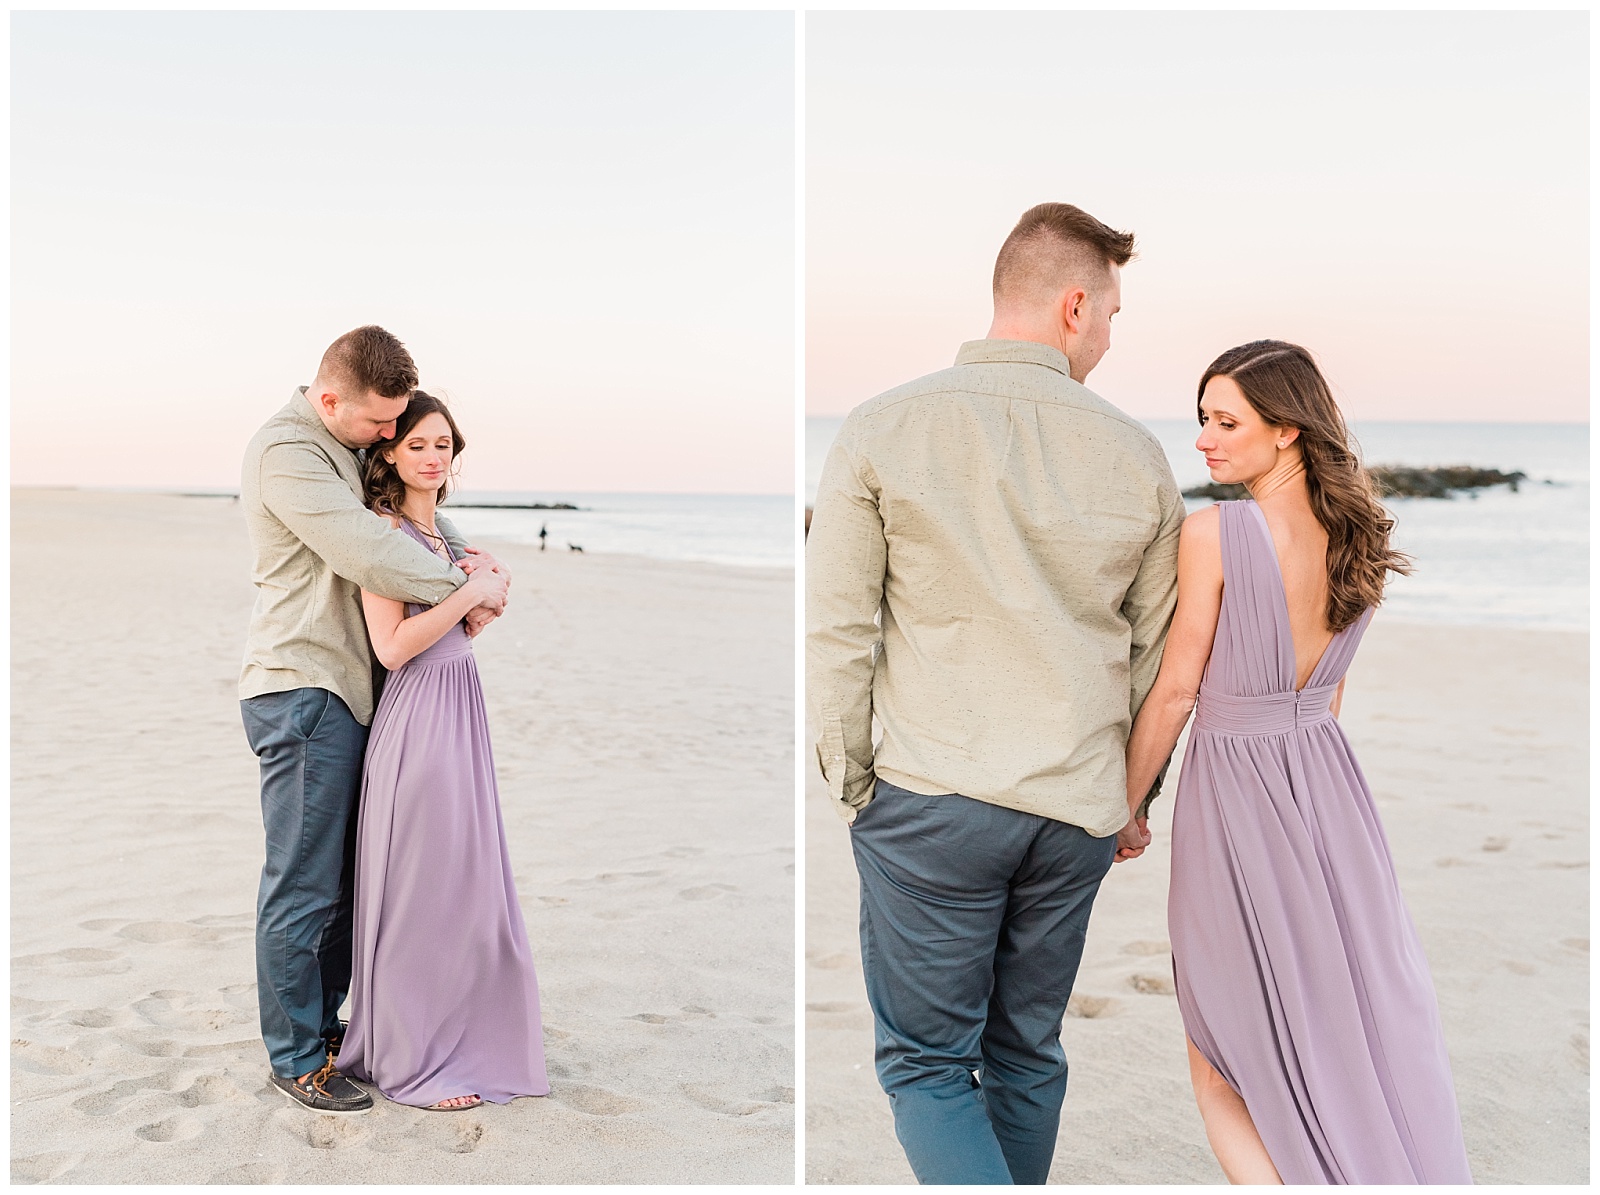 New Jersey, Engagement Session, Asbury Park, NJ, Wedding Photographer, Springtime, Light and Airy, Golden Hour, Beach